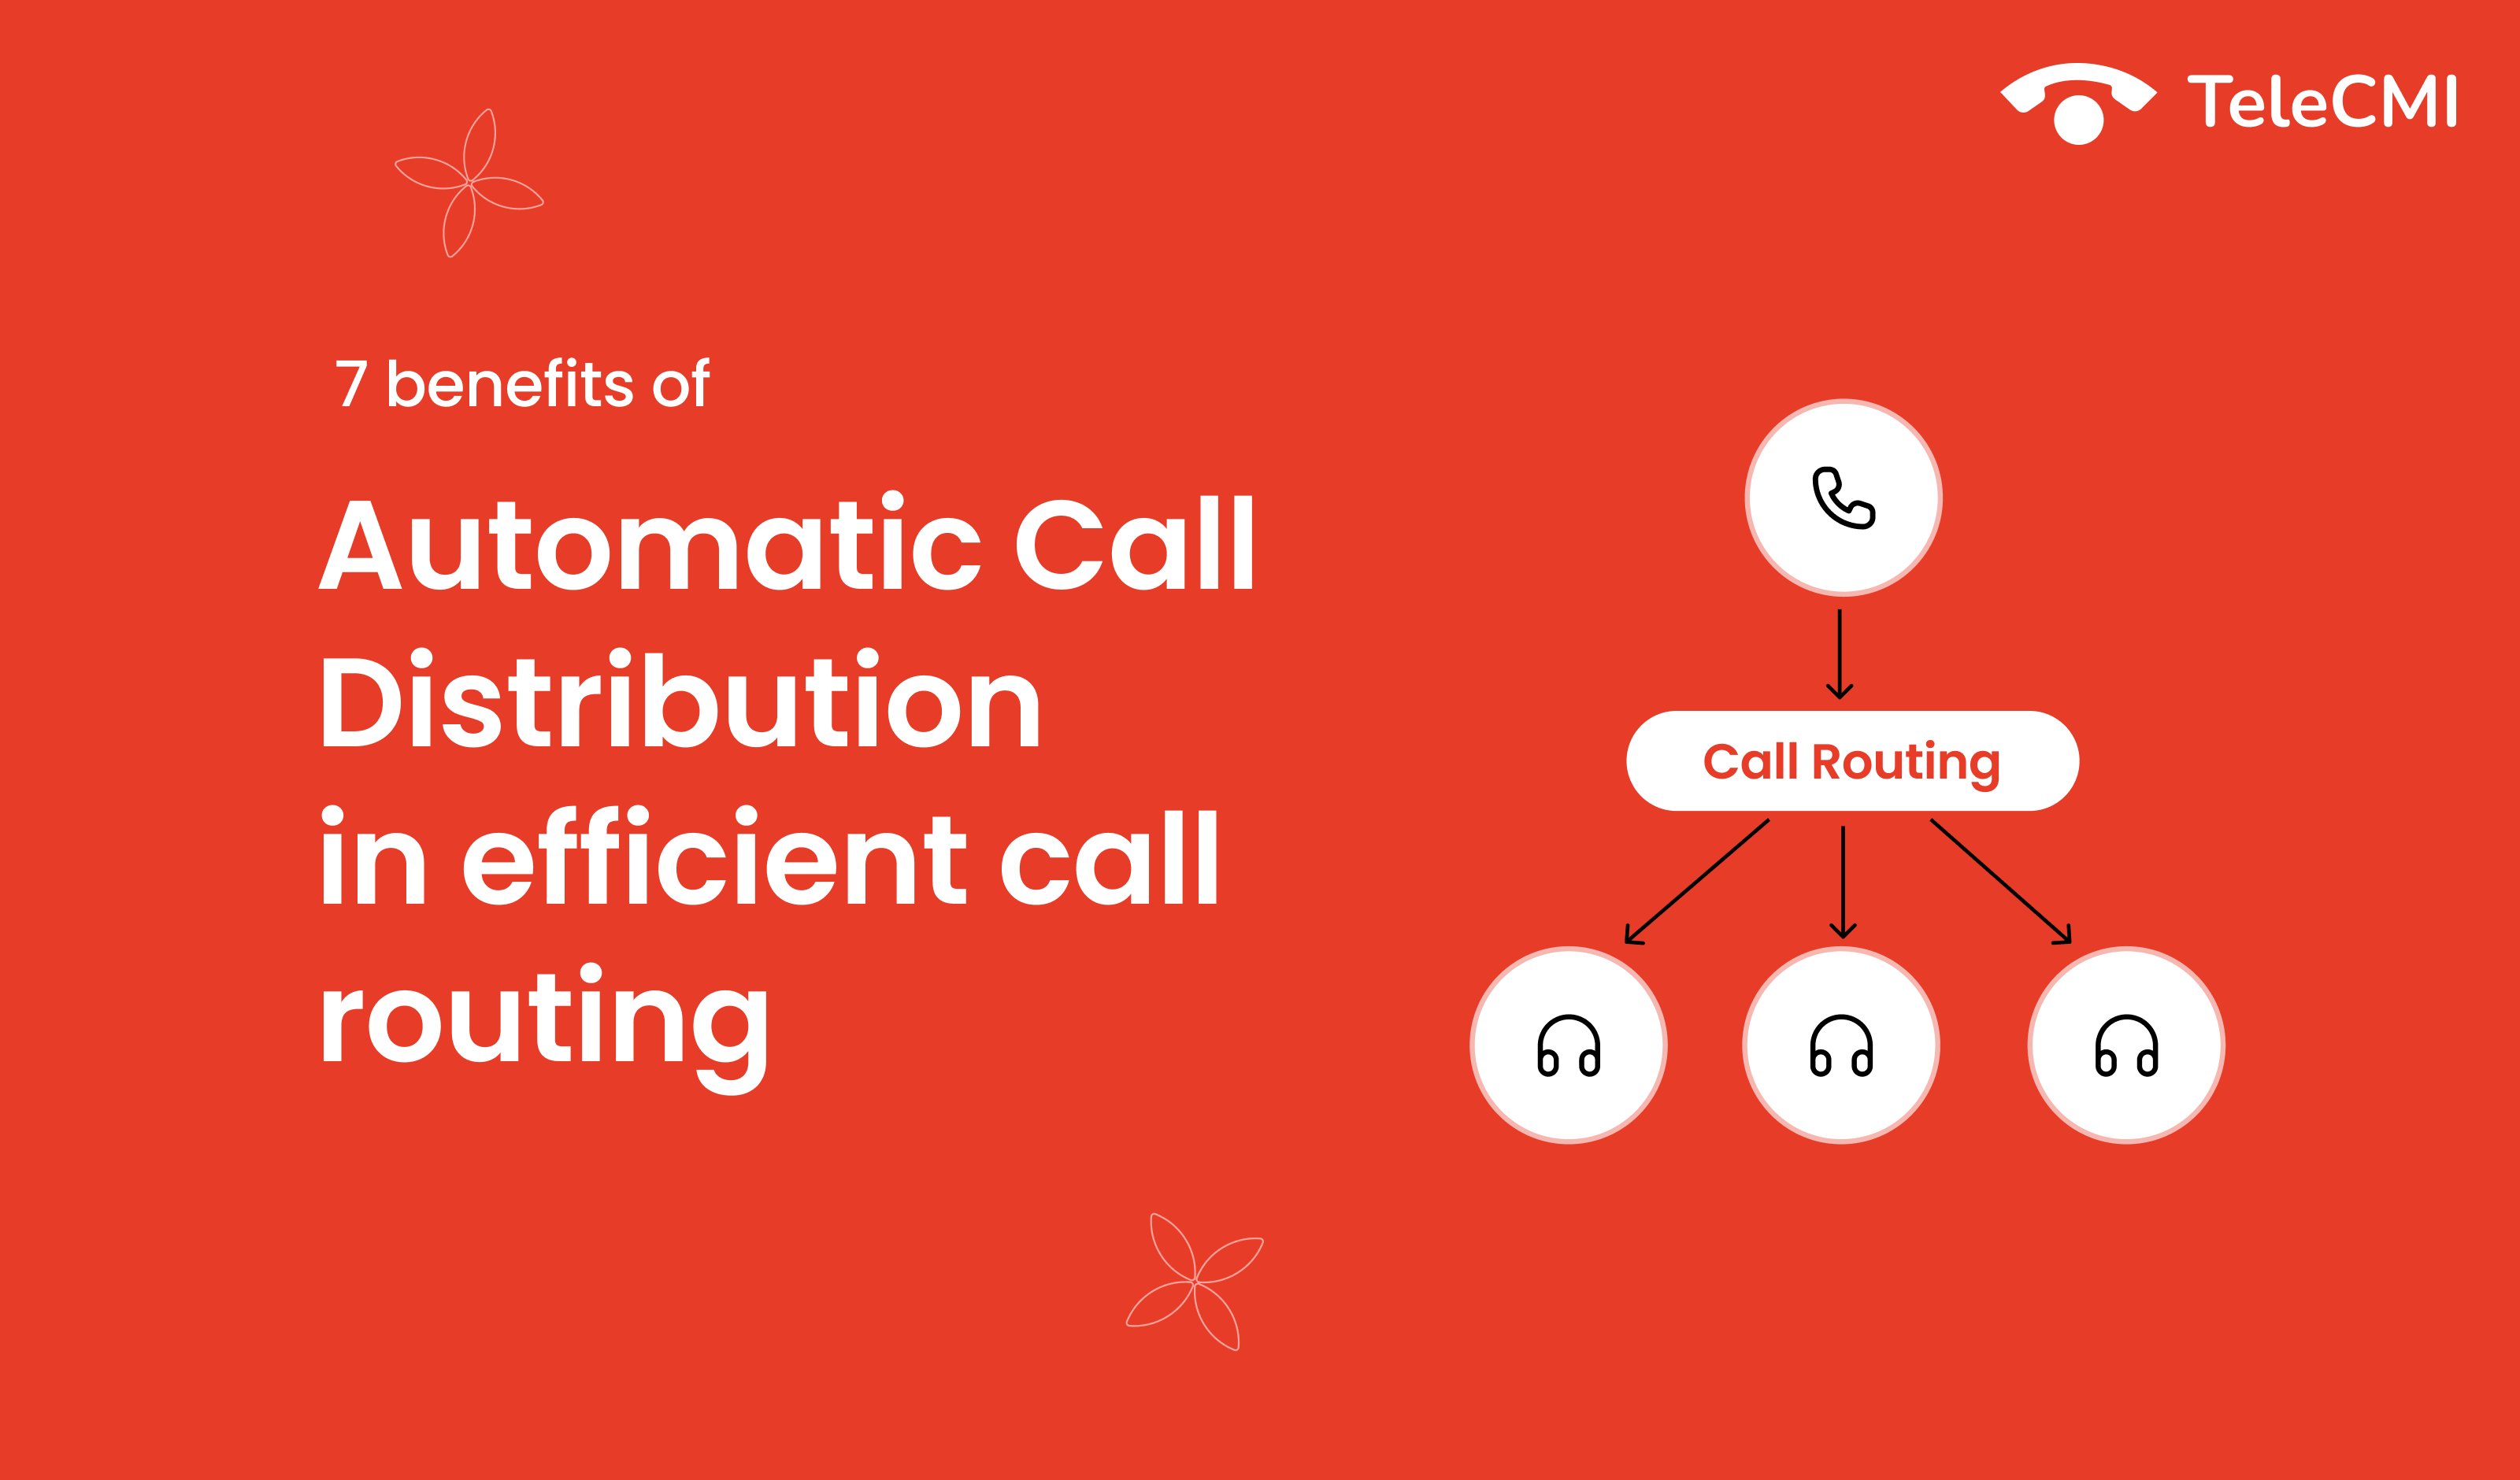 5 Reasons why TeleCMI can be one of the perfect VoIP Providers in Bangalore?